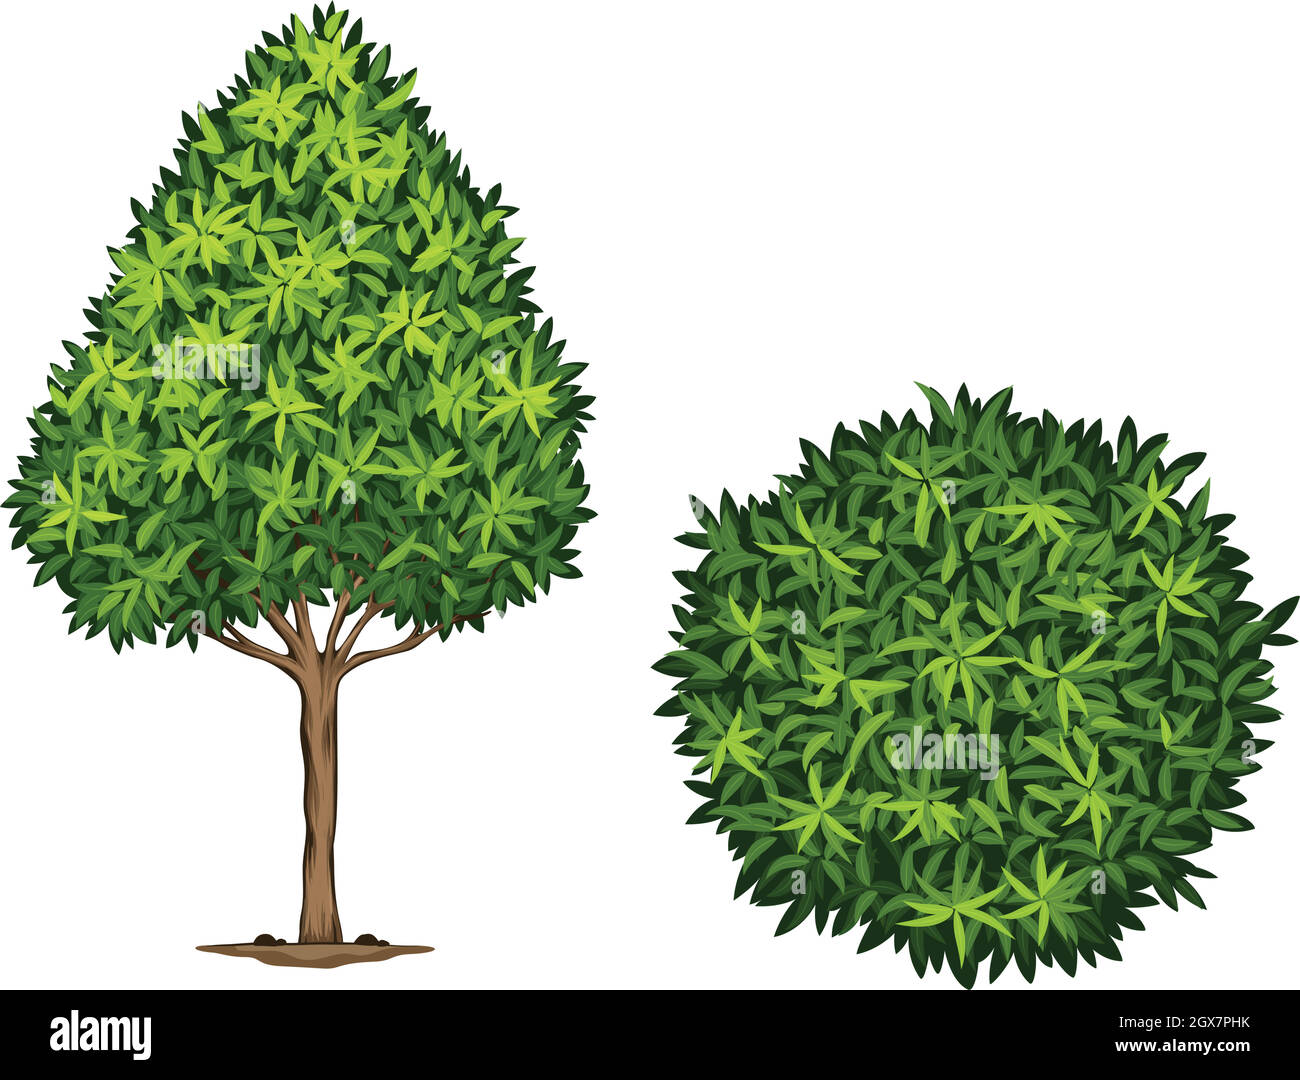 A Japanese Blueberry plant Stock Vector